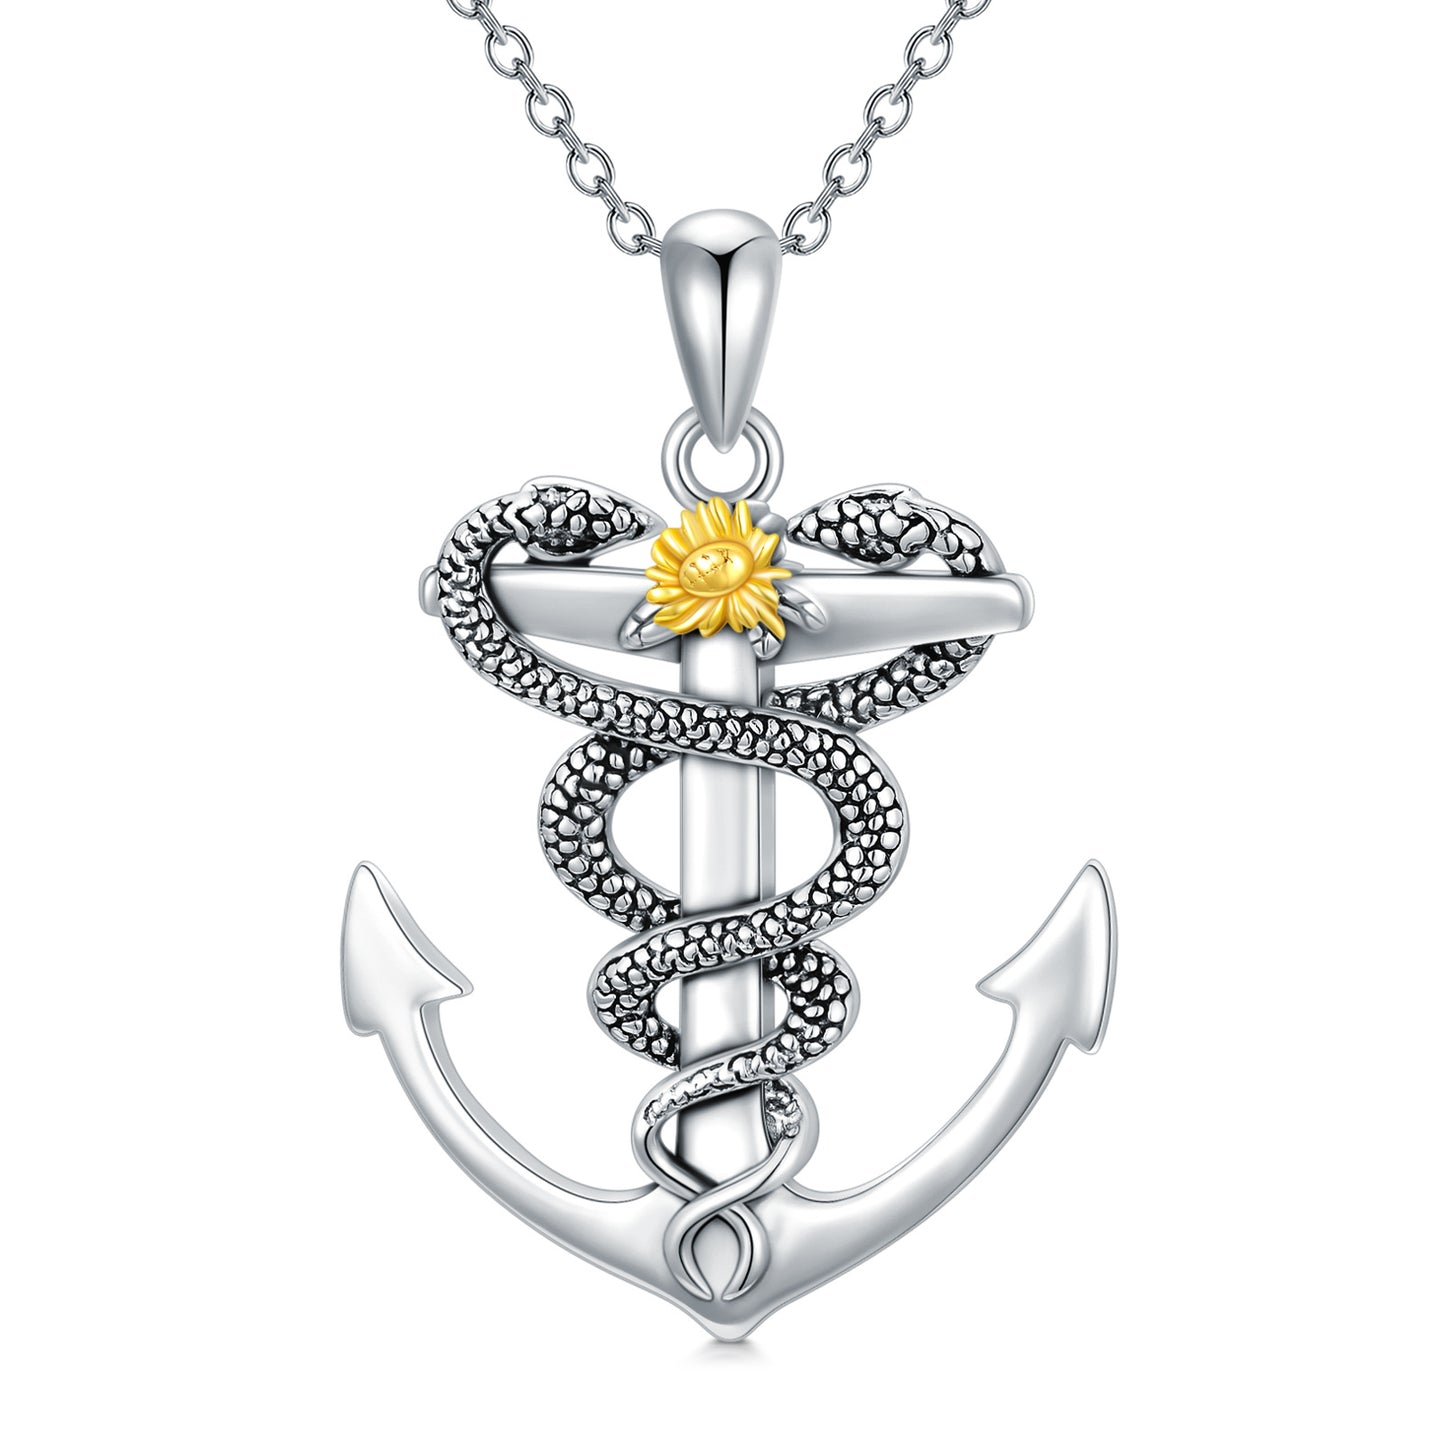 Anchor Necklace S925 Sterling Silver Snake Necklaces Nautical Sailor Pendant Jewelry Gifts for Women Men